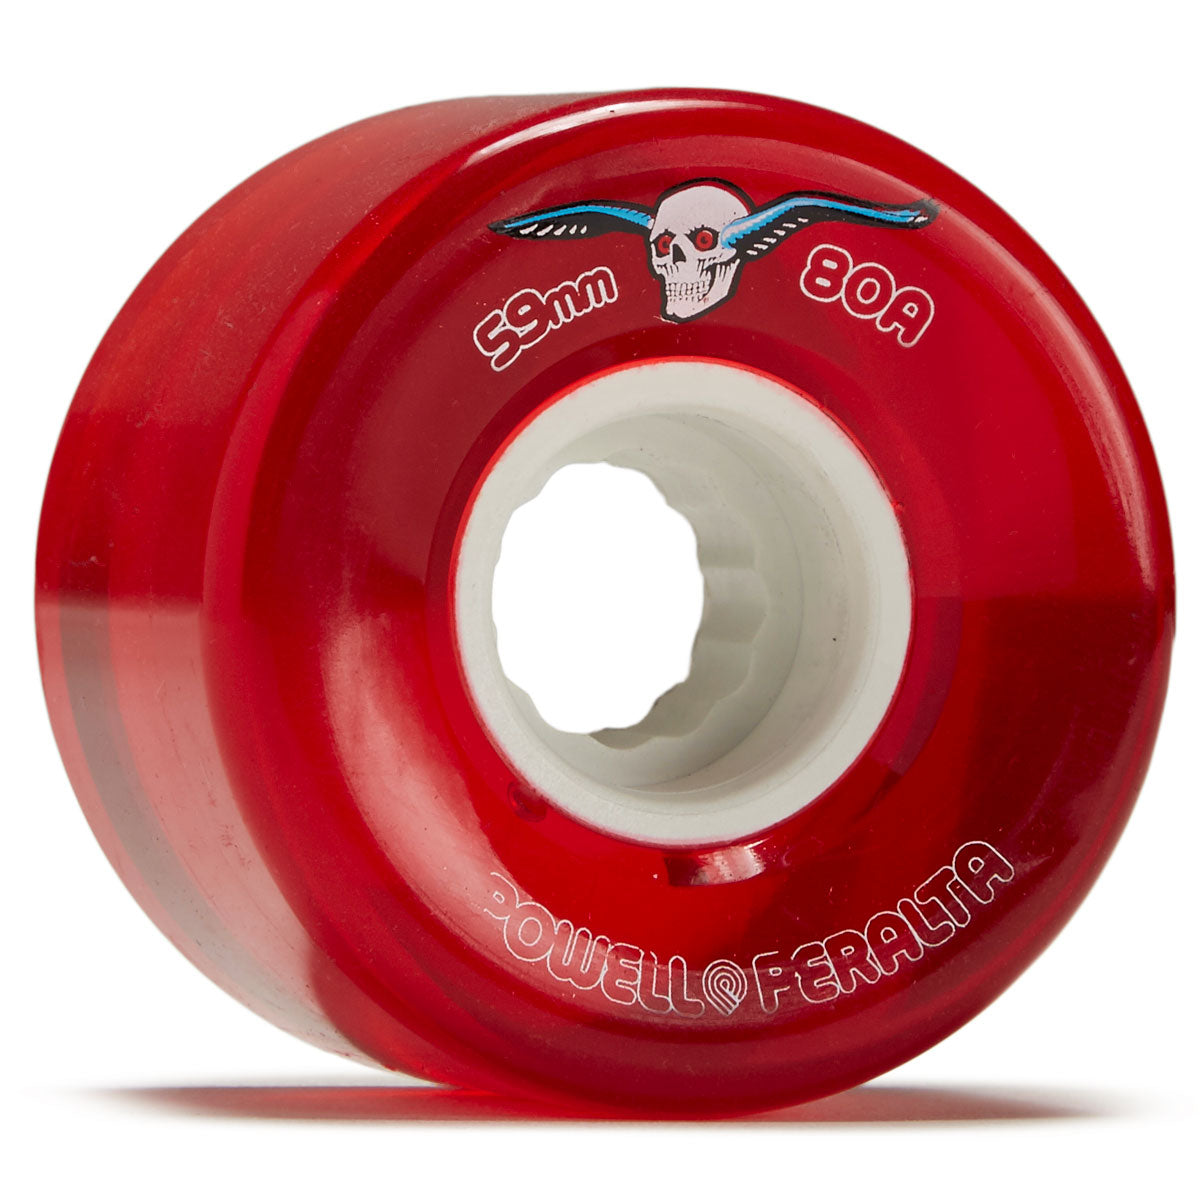 Powell-Peralta Clear Cruisers 80A Skateboard Wheels - Red - 59mm image 1